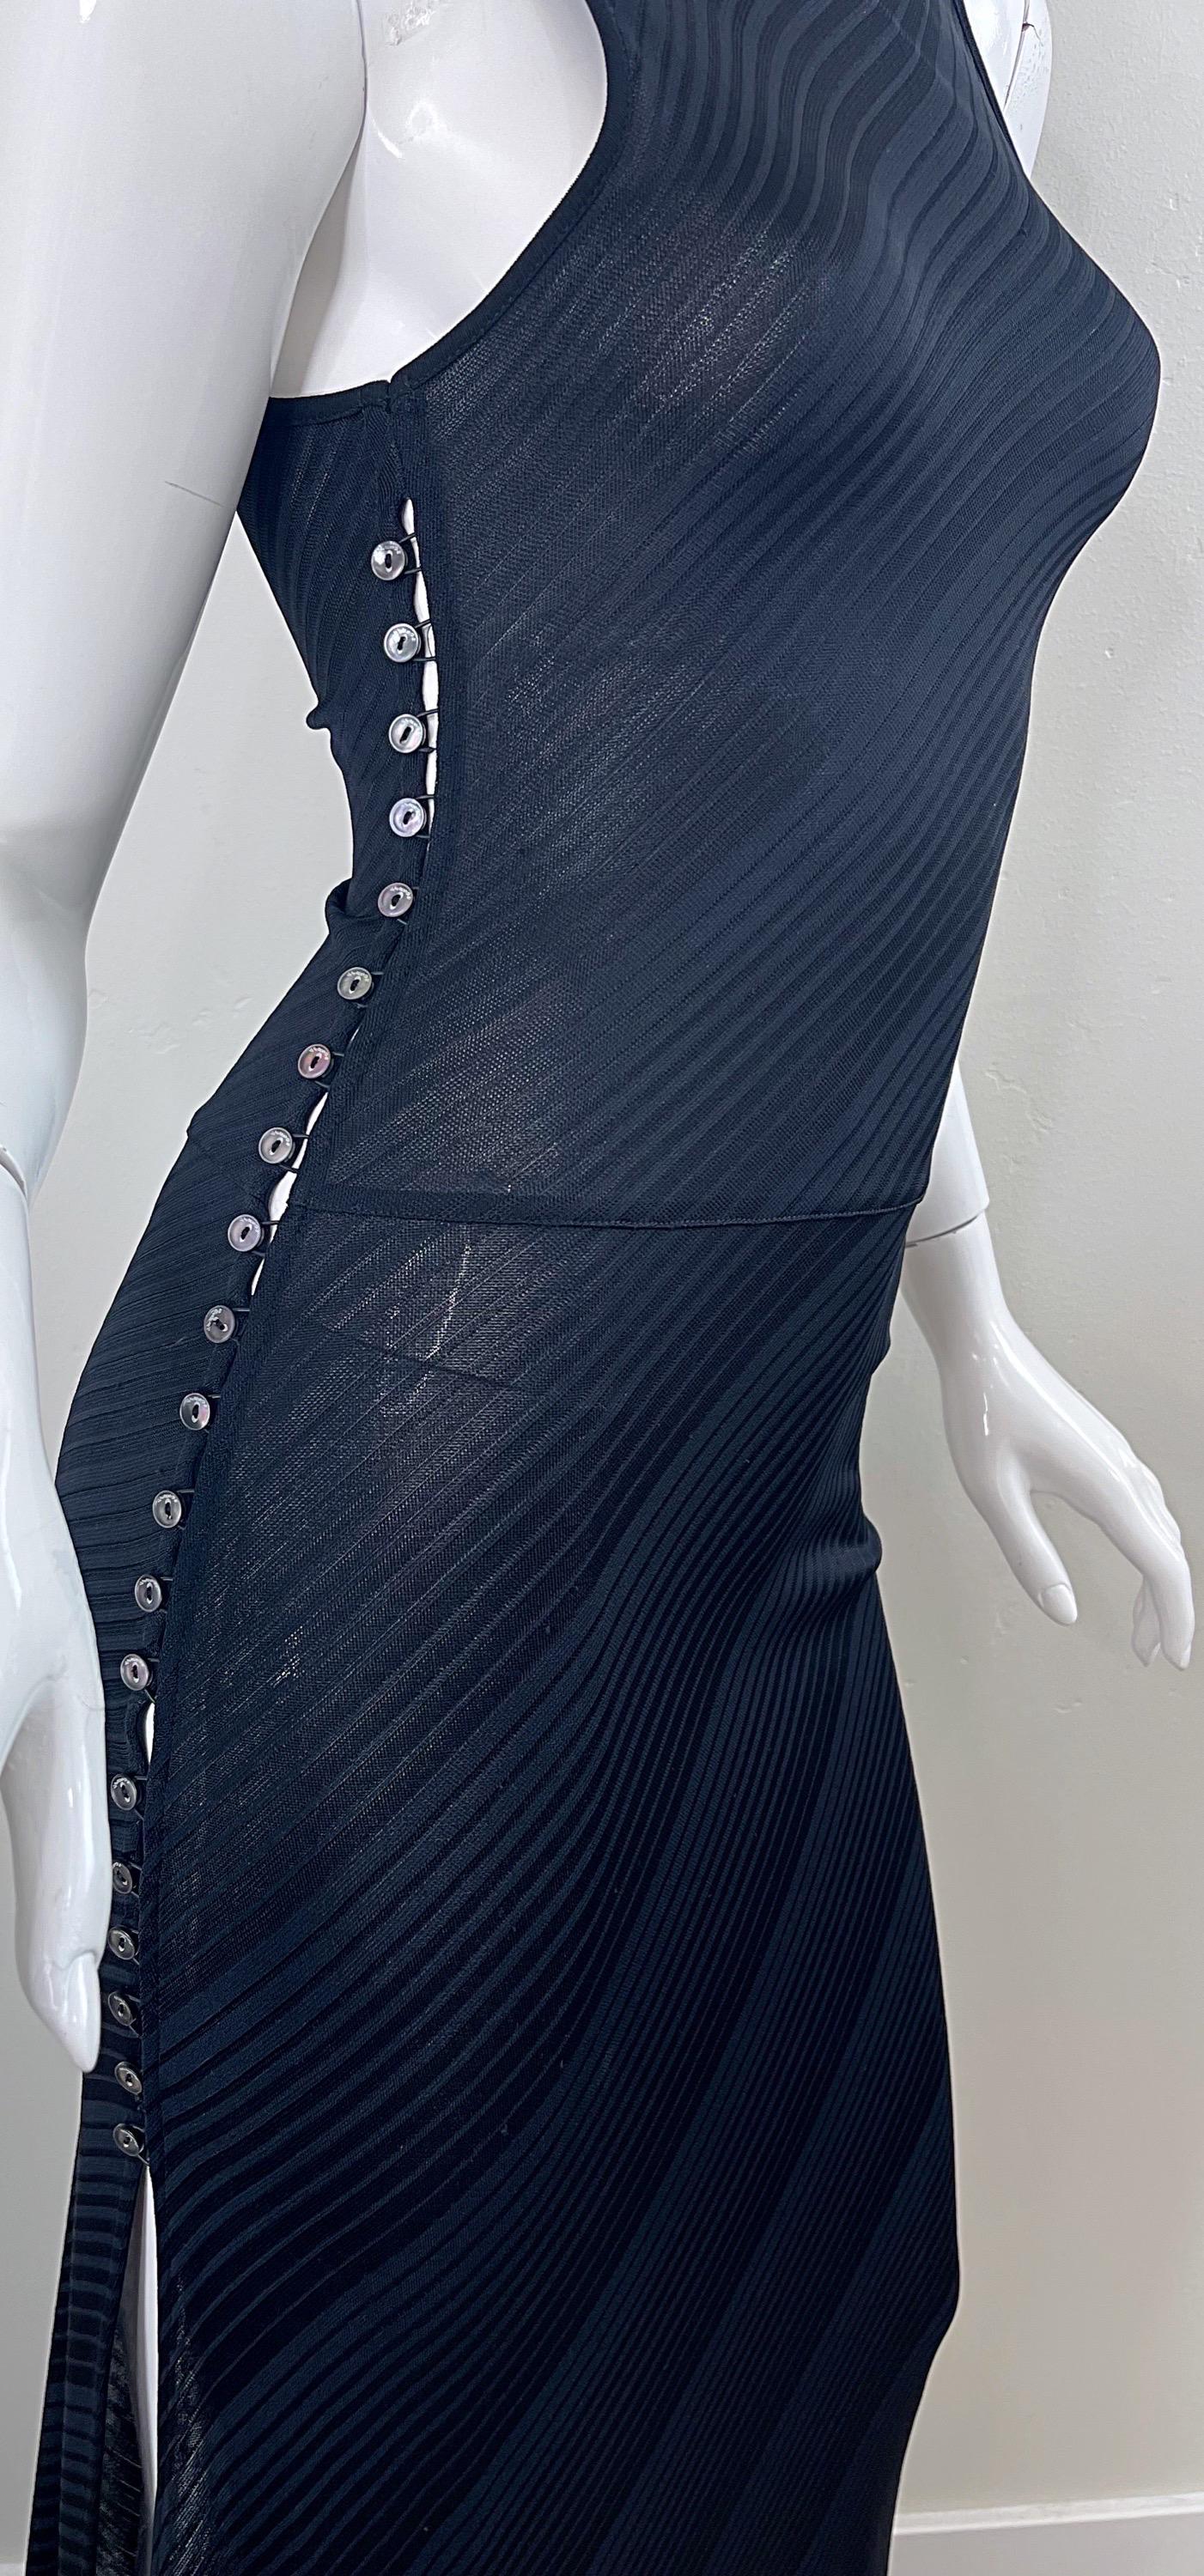 Gianni Versace Versus Spring 2001 Black Cut Out Sleeveless Vintage Jersey Gown  For Sale 4